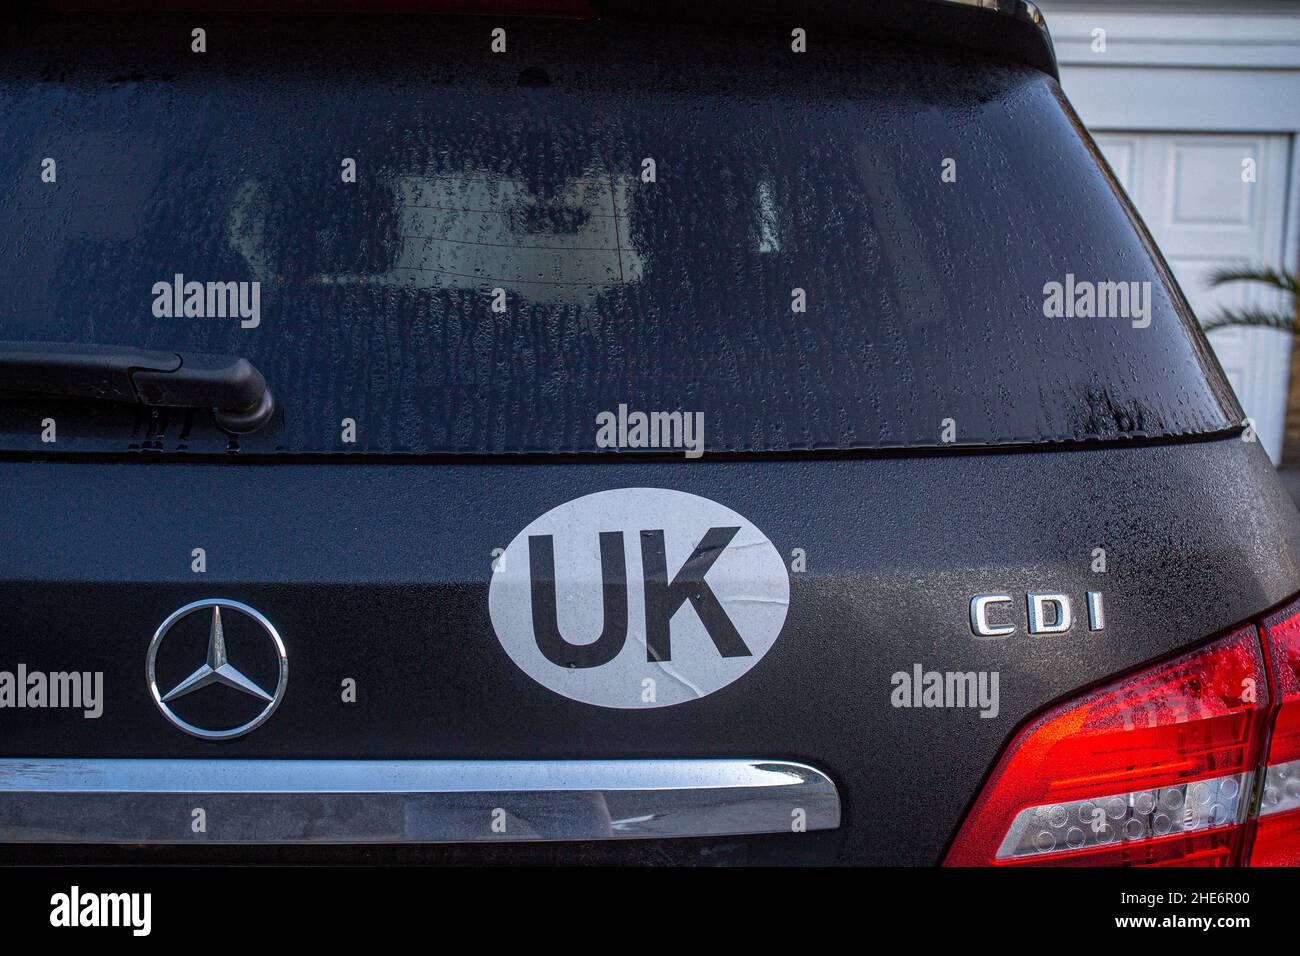 UK identifier car sticker on car. When travelling overseas motorists must now display the UK logo on the rear of their vehicle.UK Sticker on black ca Stock Photo